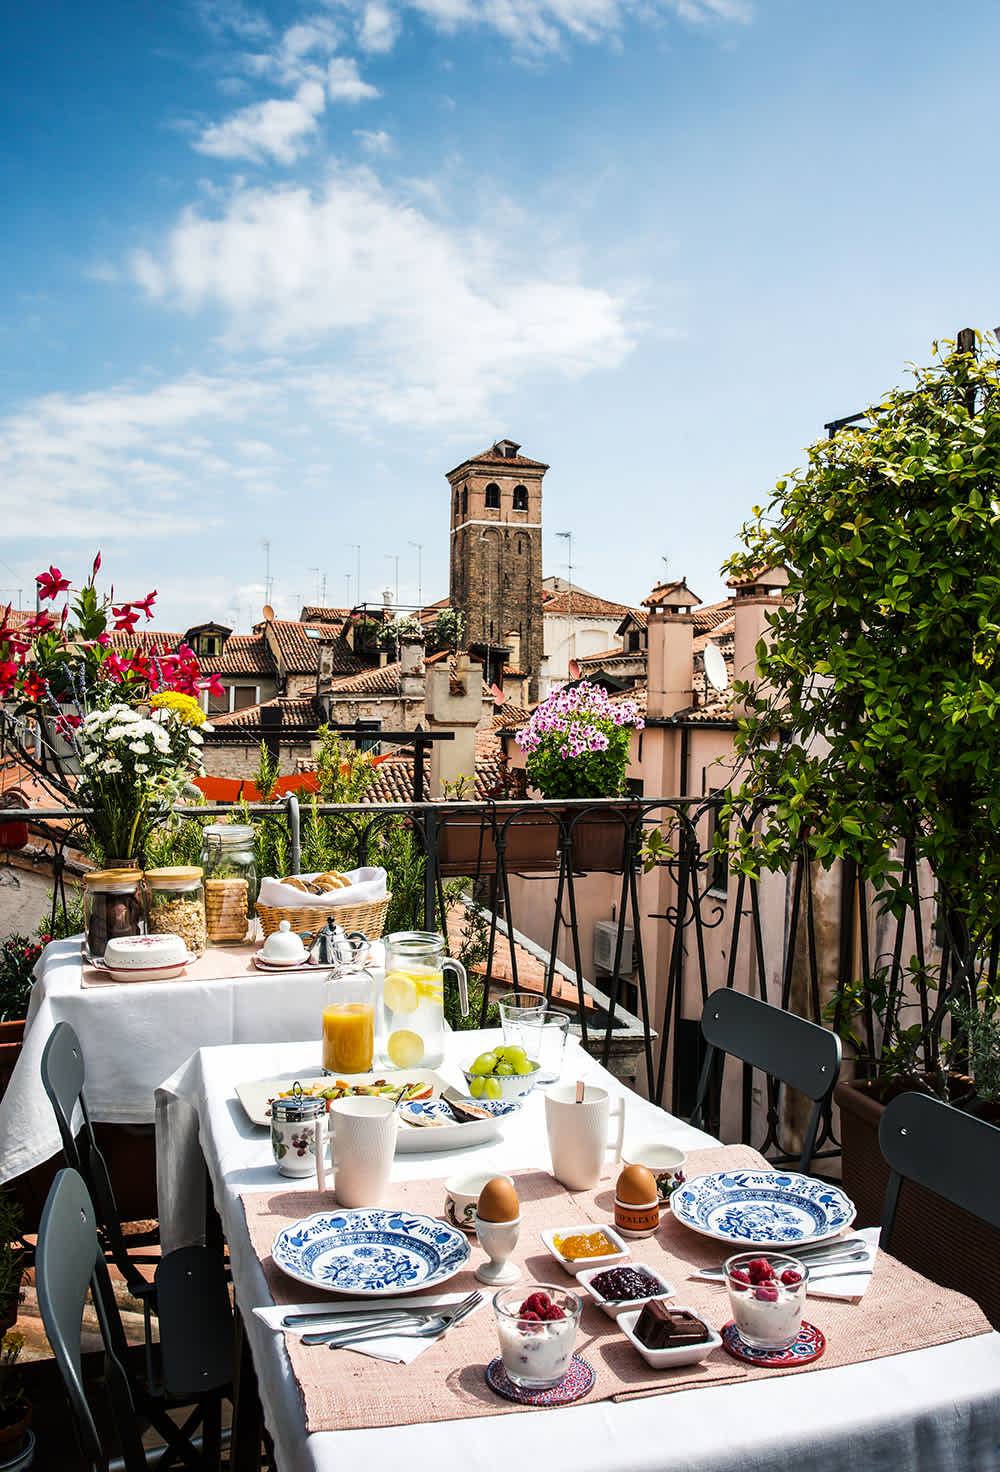 Overview of the terrace with breakfast